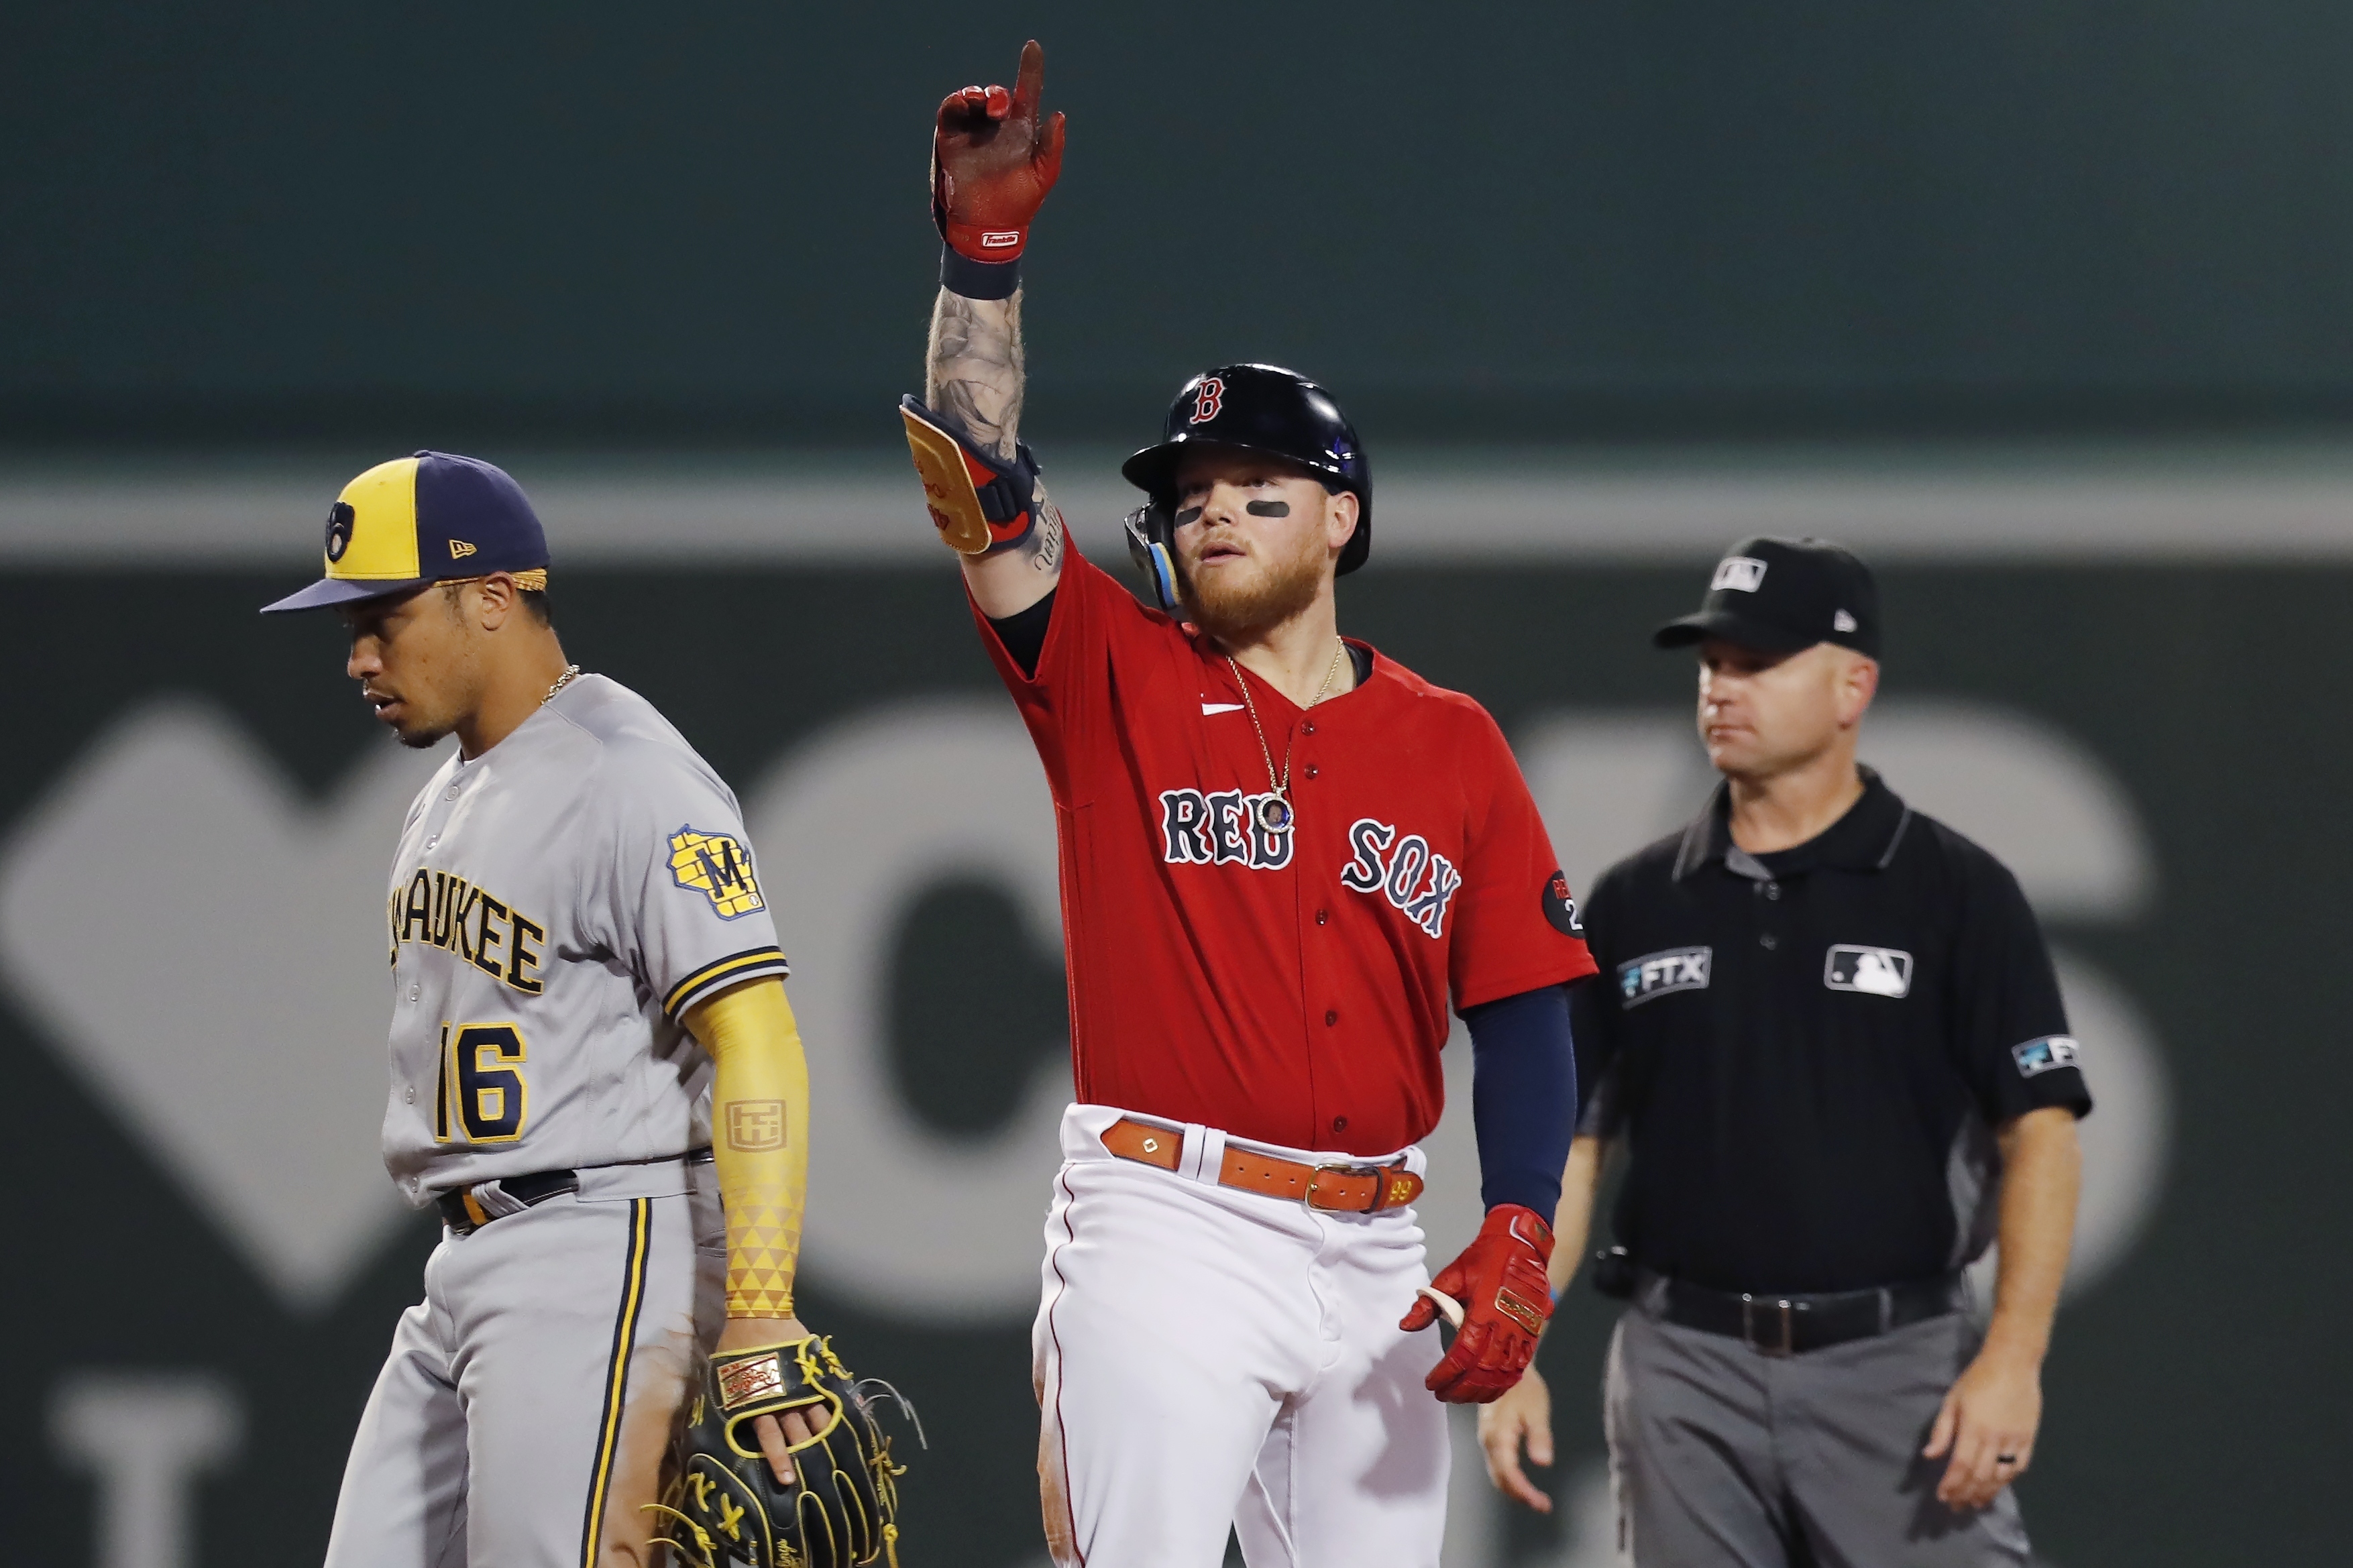 Verdugo appears to be in line to replace Bradley in center field at Fenway